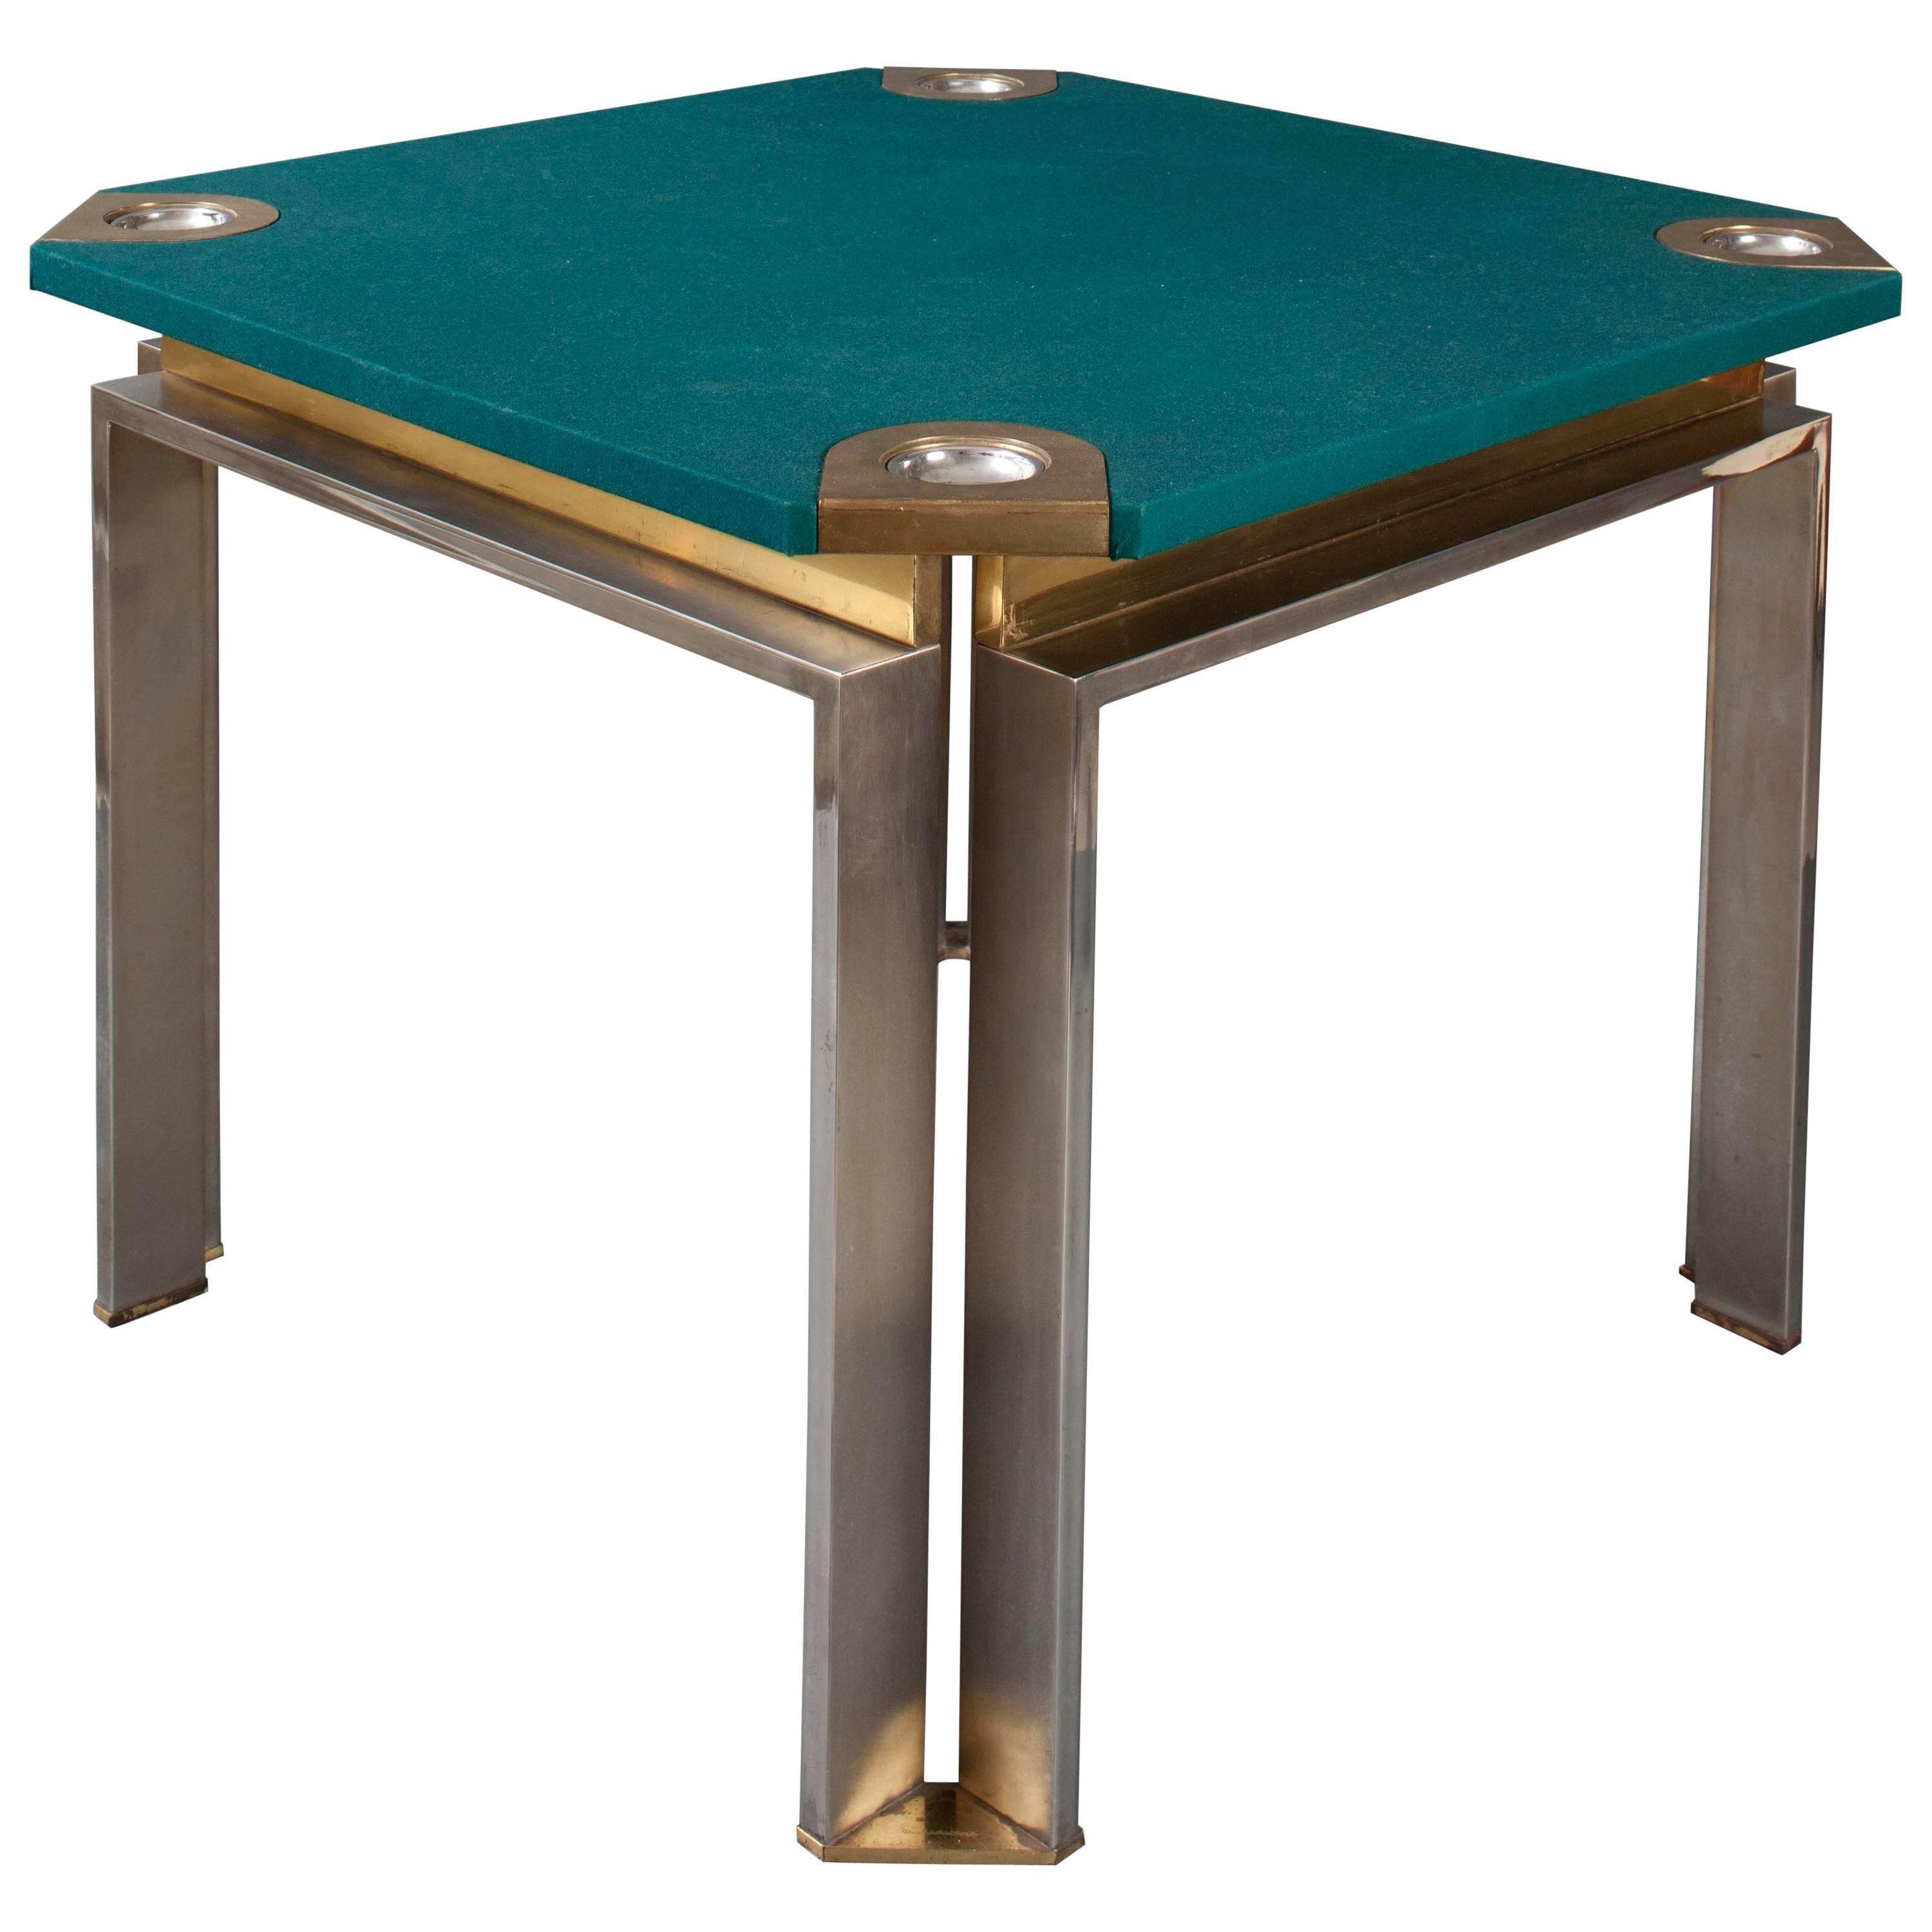 20th Century Italian Game-Poker Table 1970s "Dada Industrial Design" For Sale